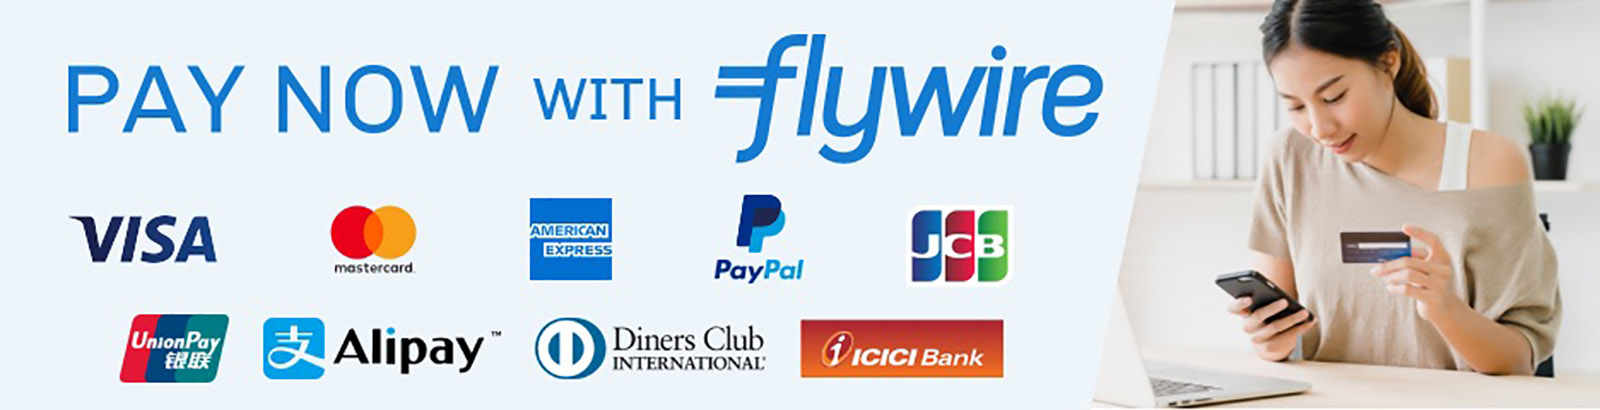 Flywire banner